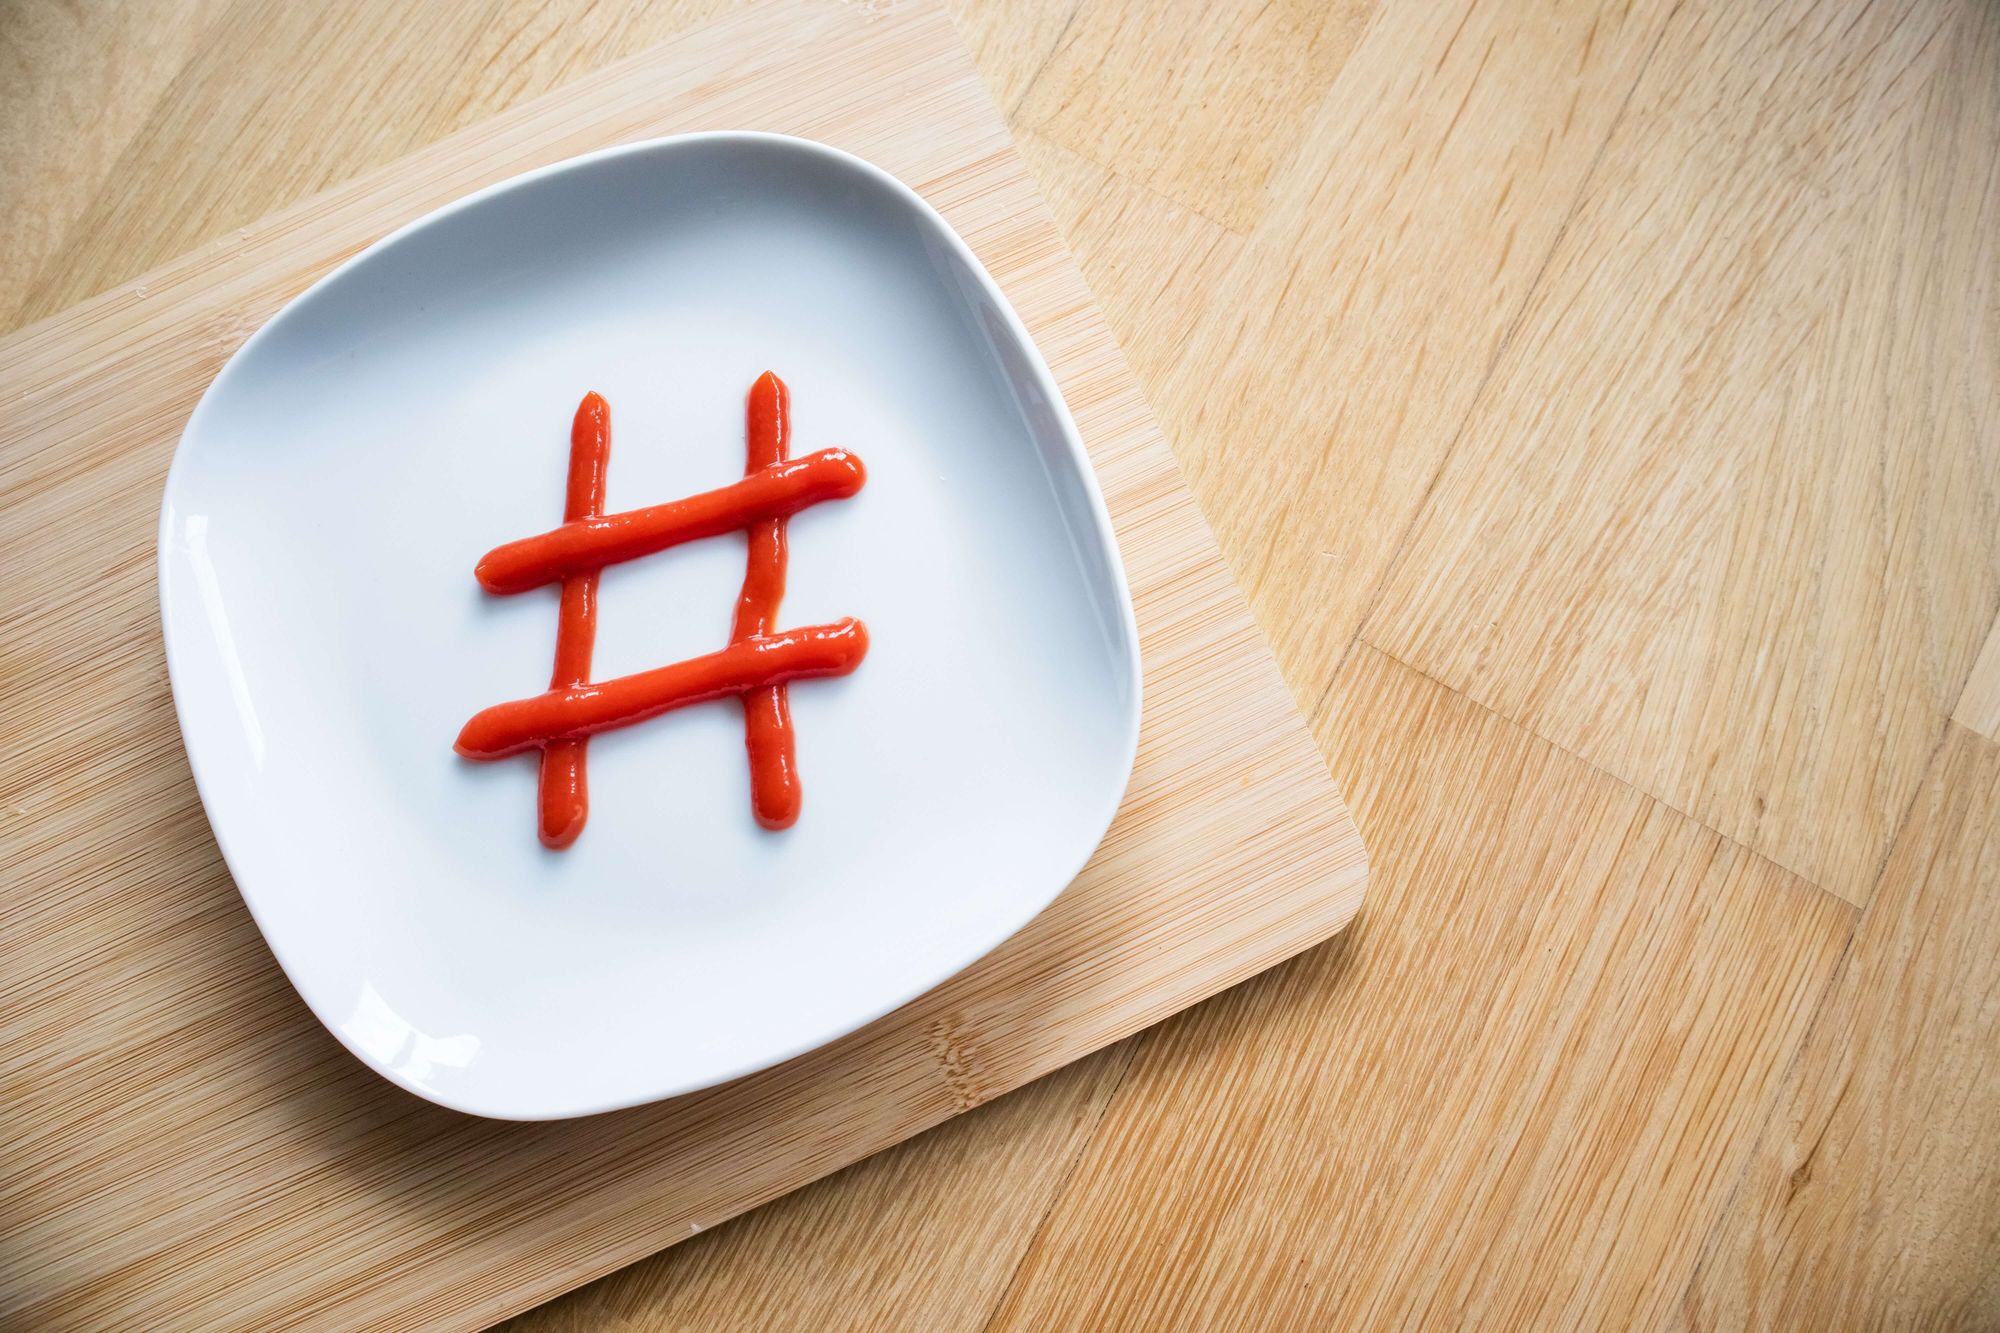 TikTok Hashtags: How to Use them for Growth